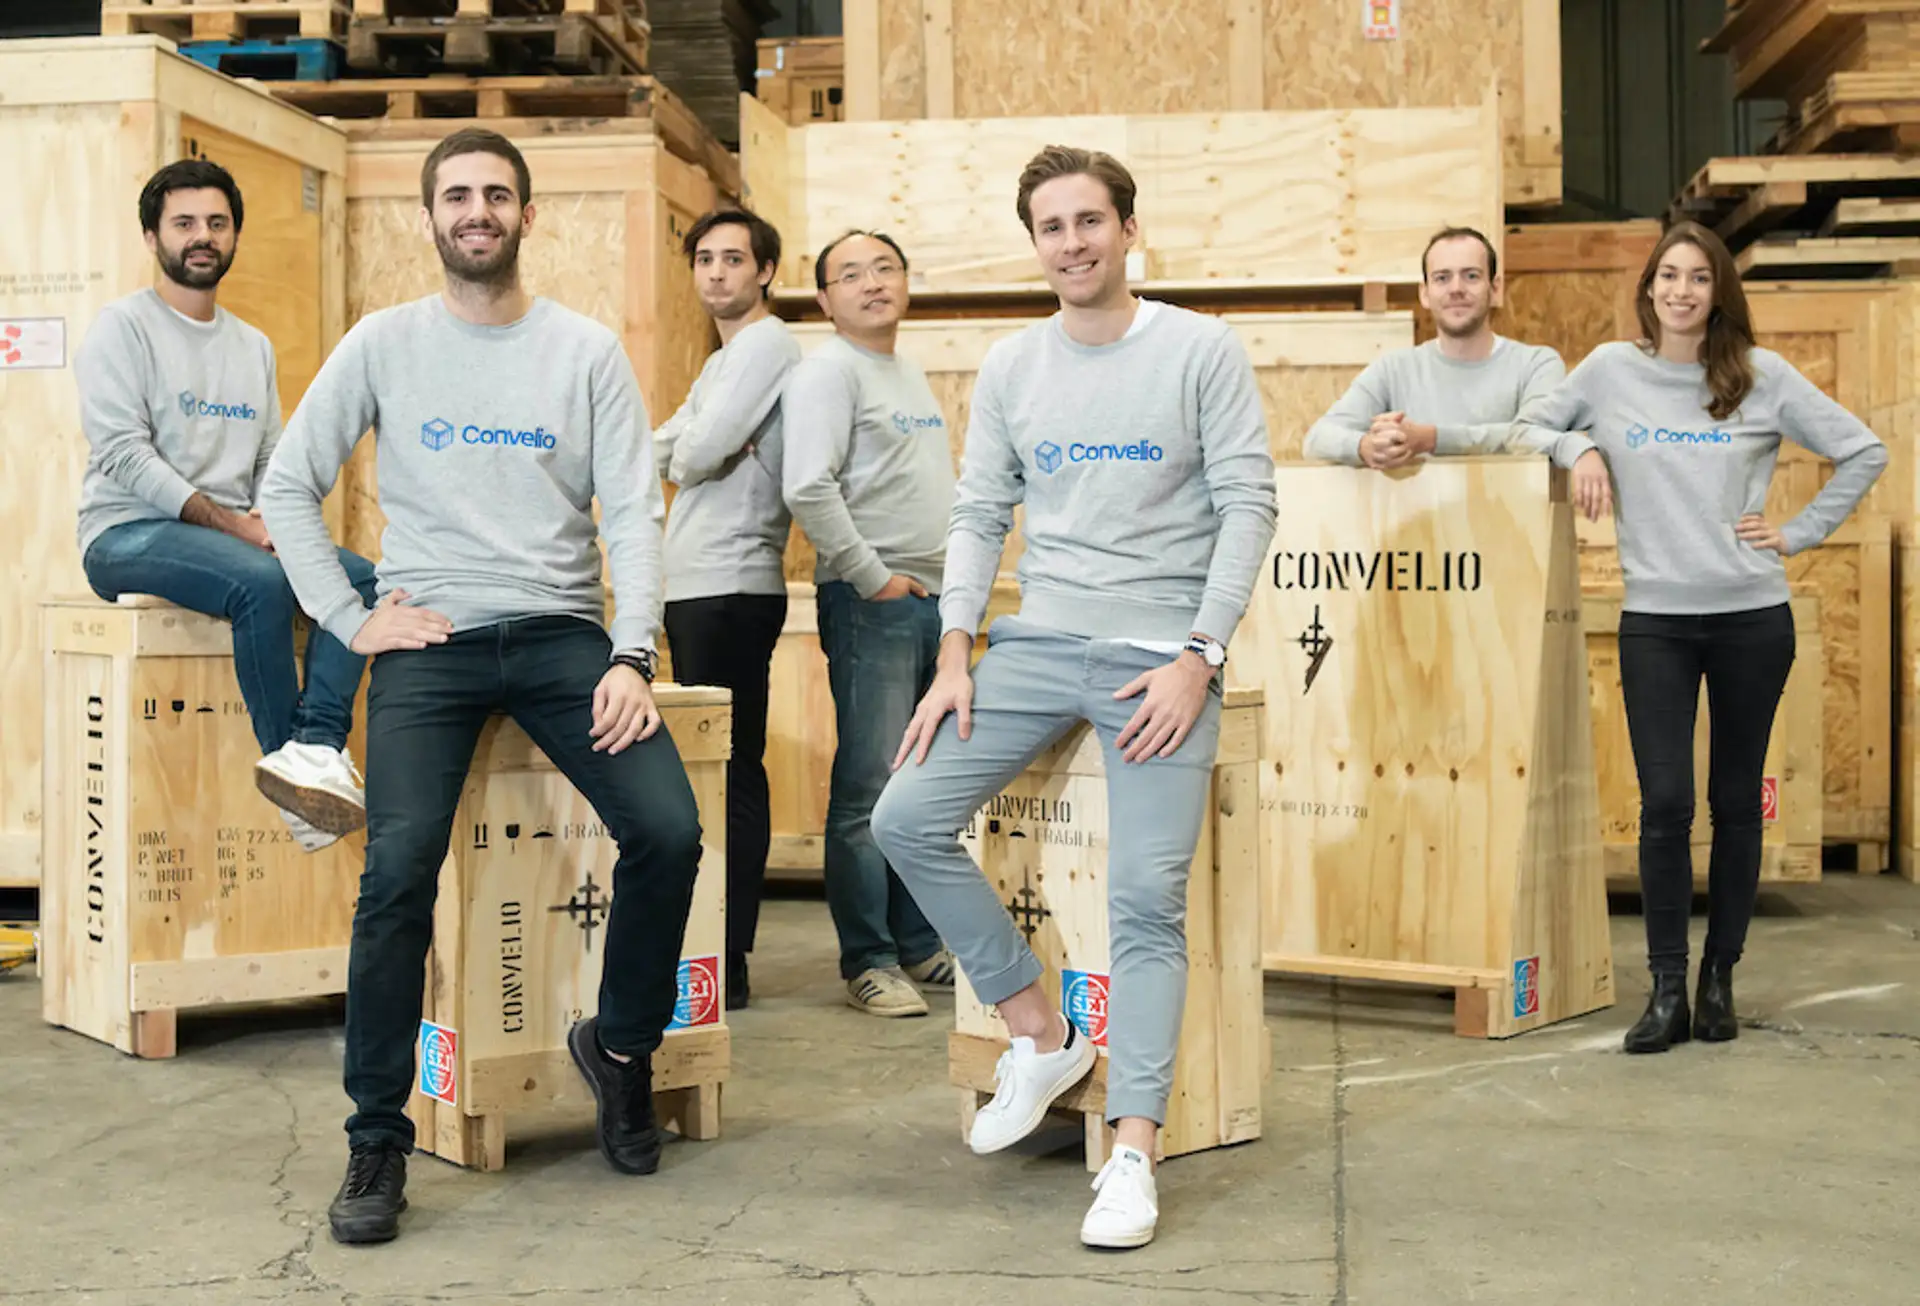 A photograph of the Convelio team, all wearing matching grey sweatshirts, leaning against wooden storage crates for art.